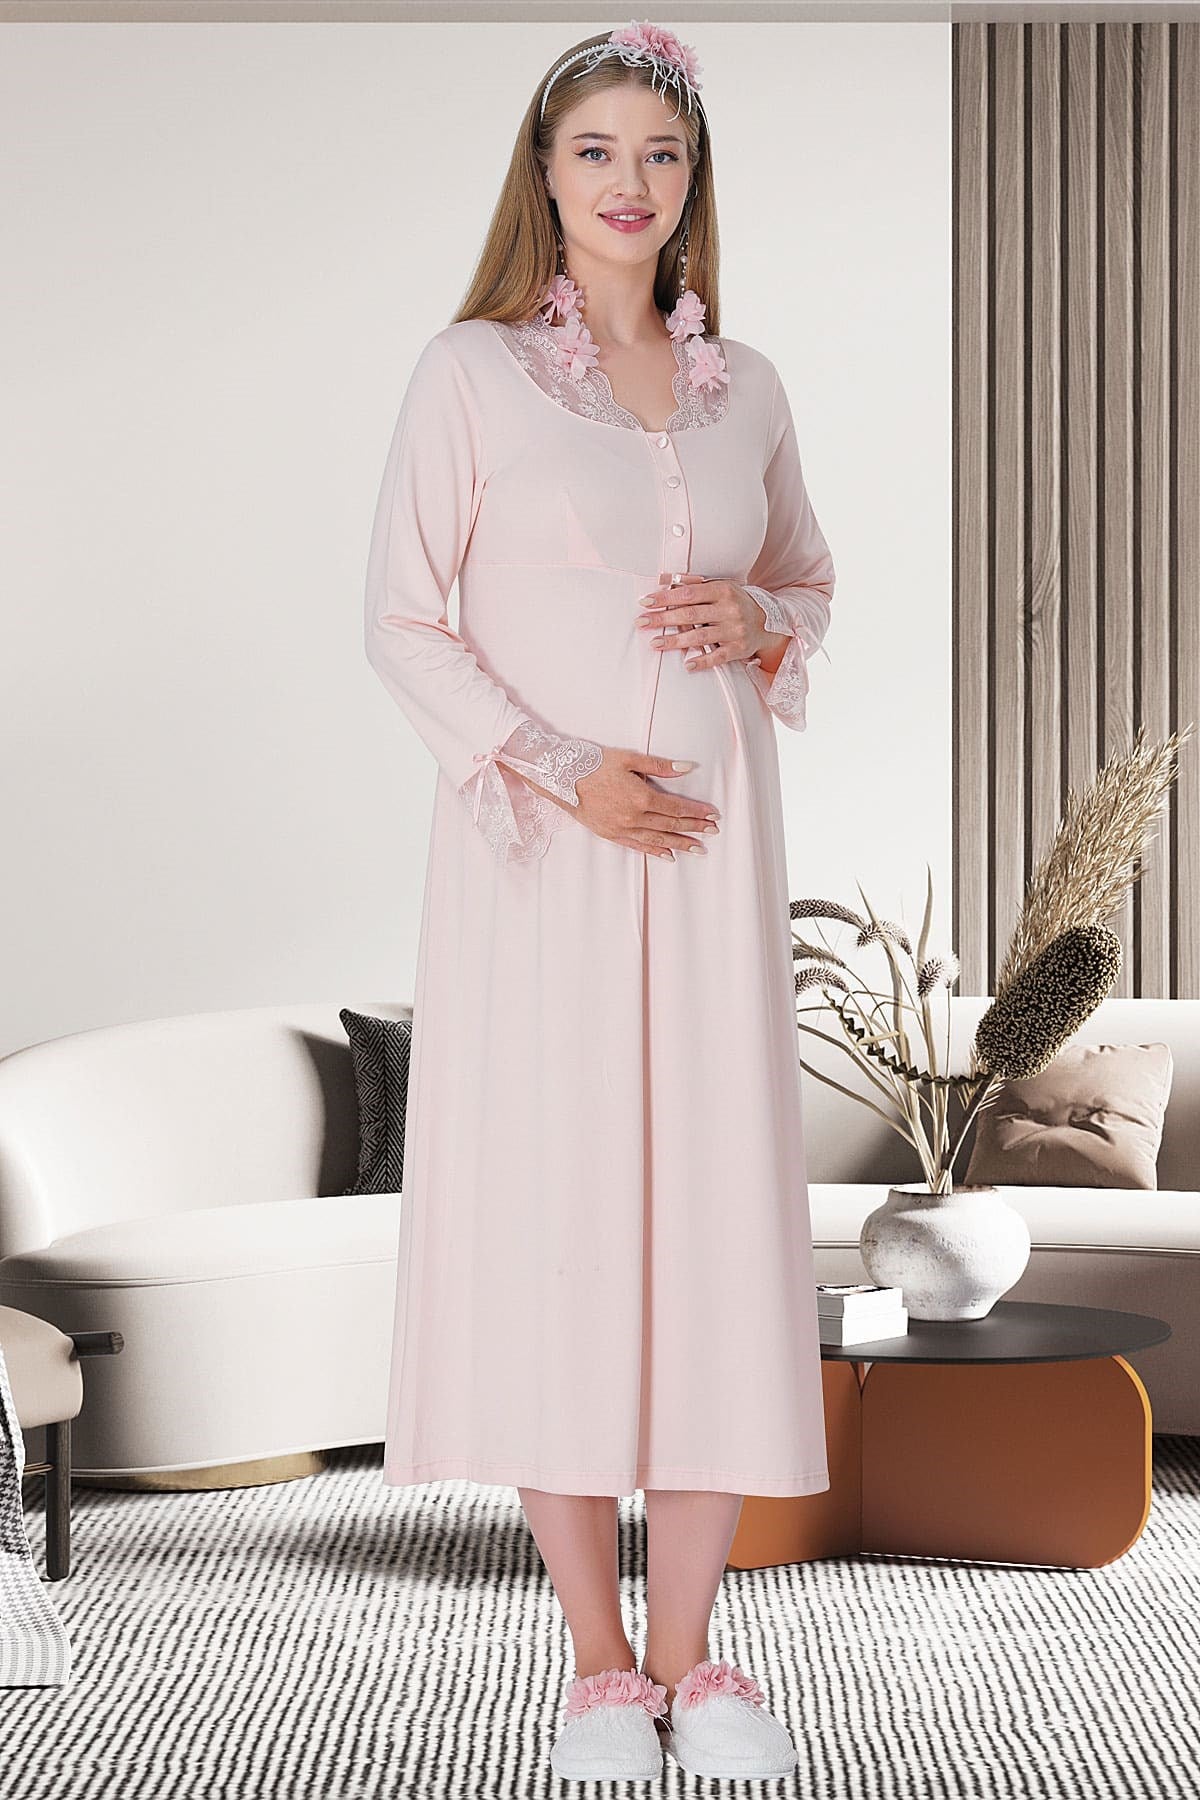 Shopymommy 11113 Woven Long Sleeve Maternity & Nursing Nightgown